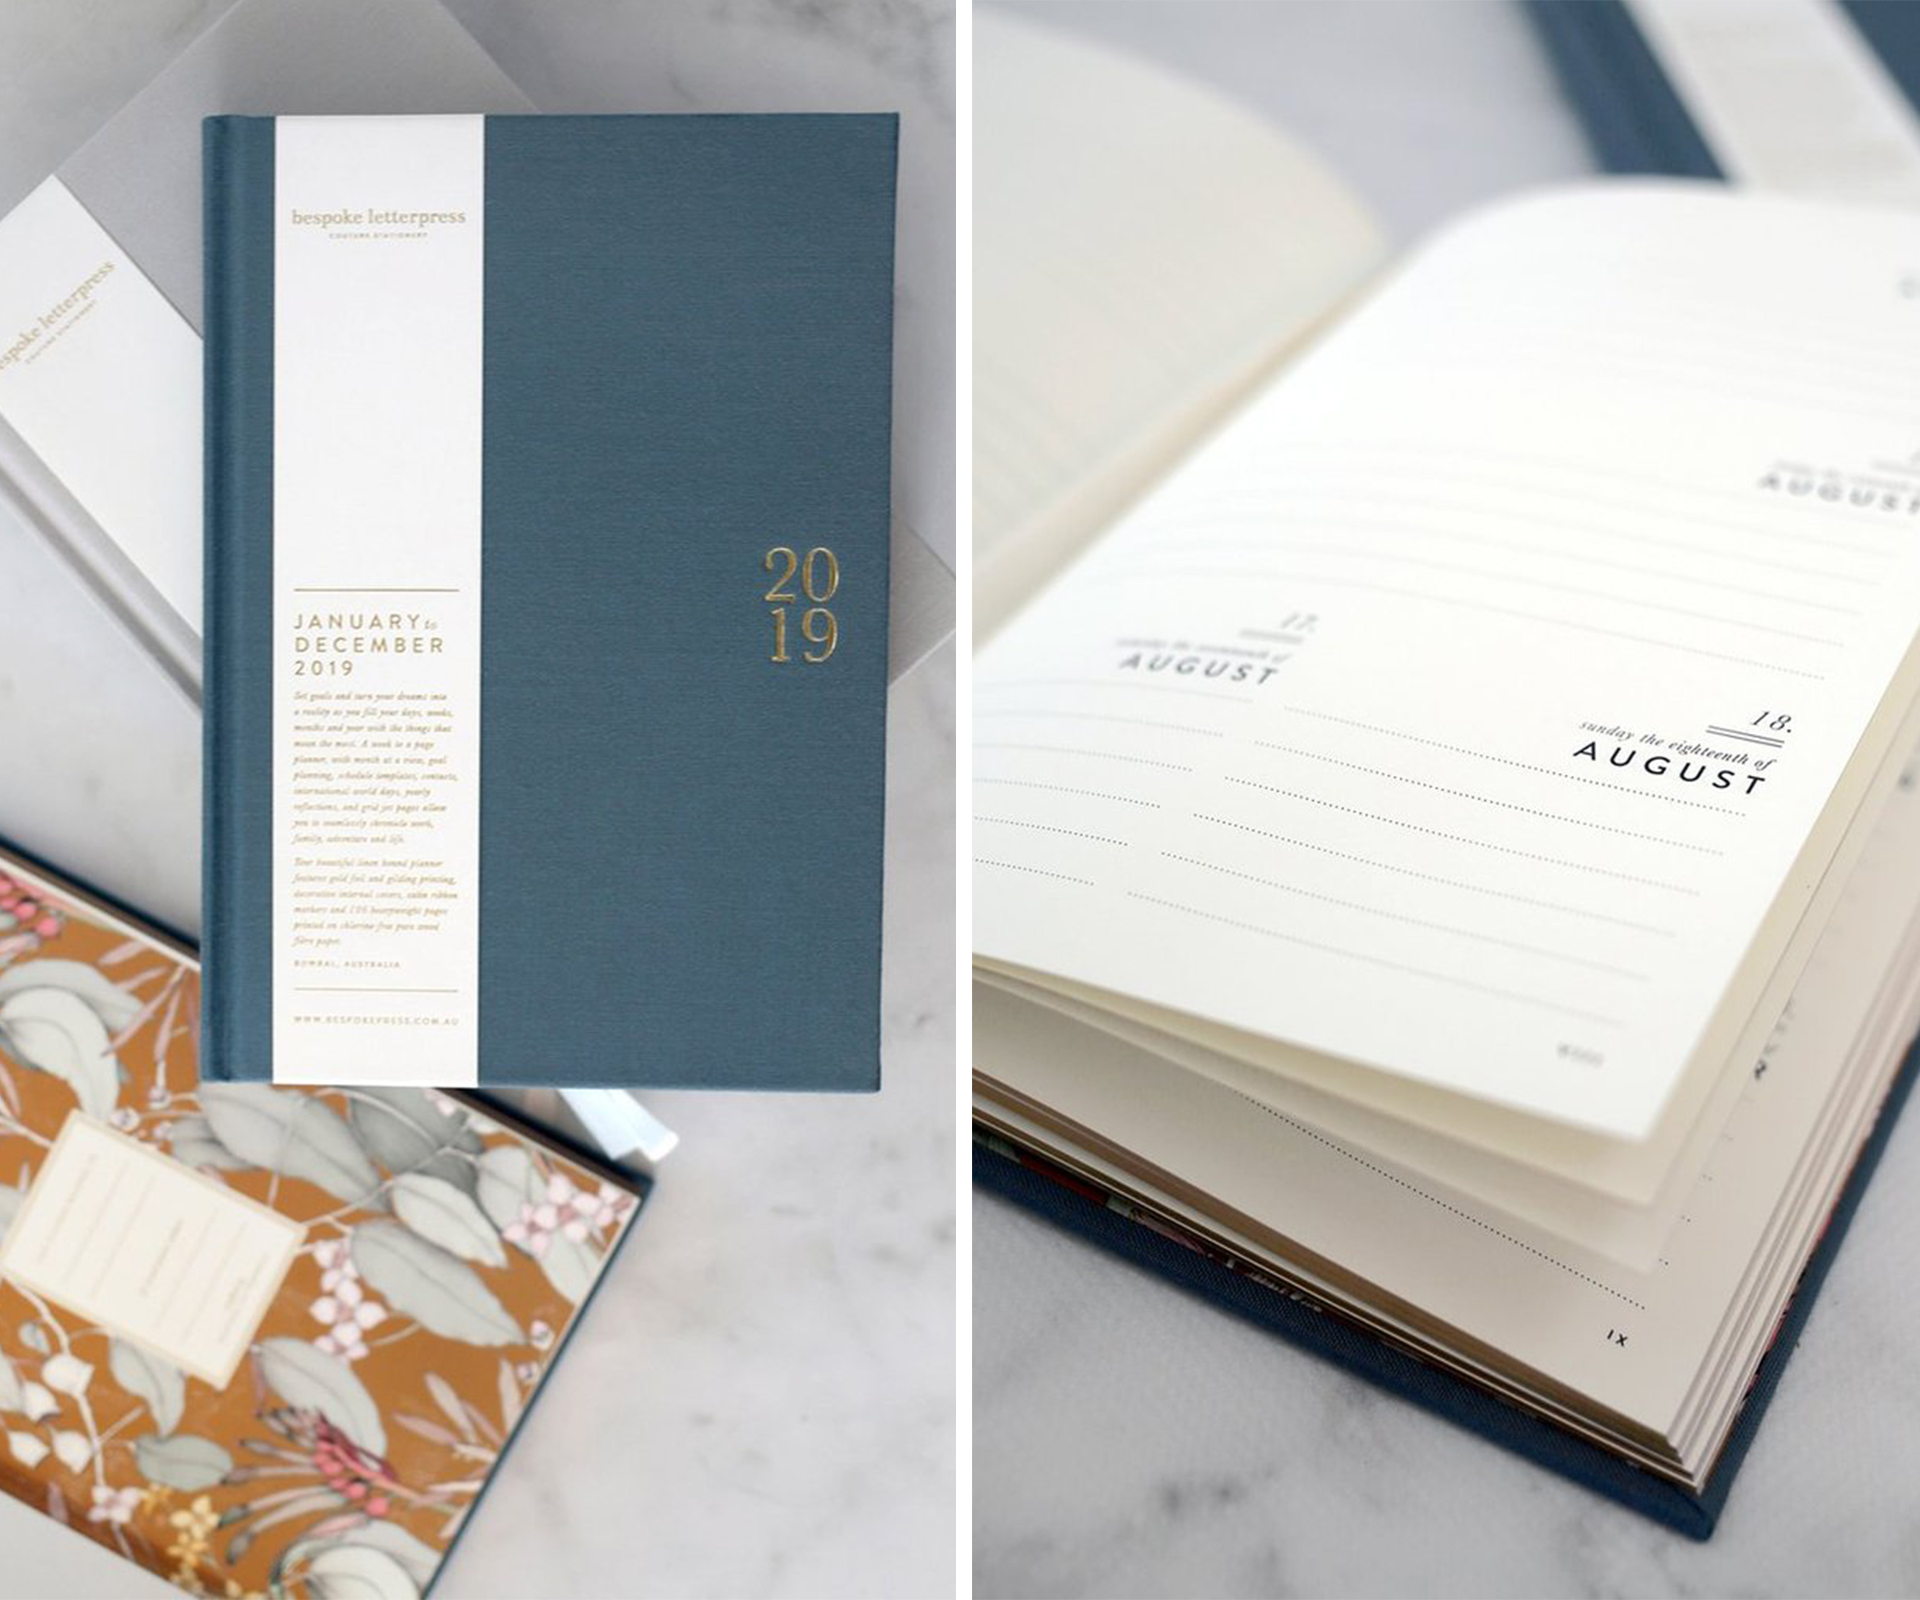 2019 linen bound planner by Bespoke Letterpress This weekly planner is perfect for those who like a little bit of class and elegance in their stationery. With gold foil printing, gold gilded edges, decorative internal covers and light ivory stock, it’s a diary that you’ll enjoy writing your daily ‘to-do’ list in. $55.90 from Pepa Stationery.